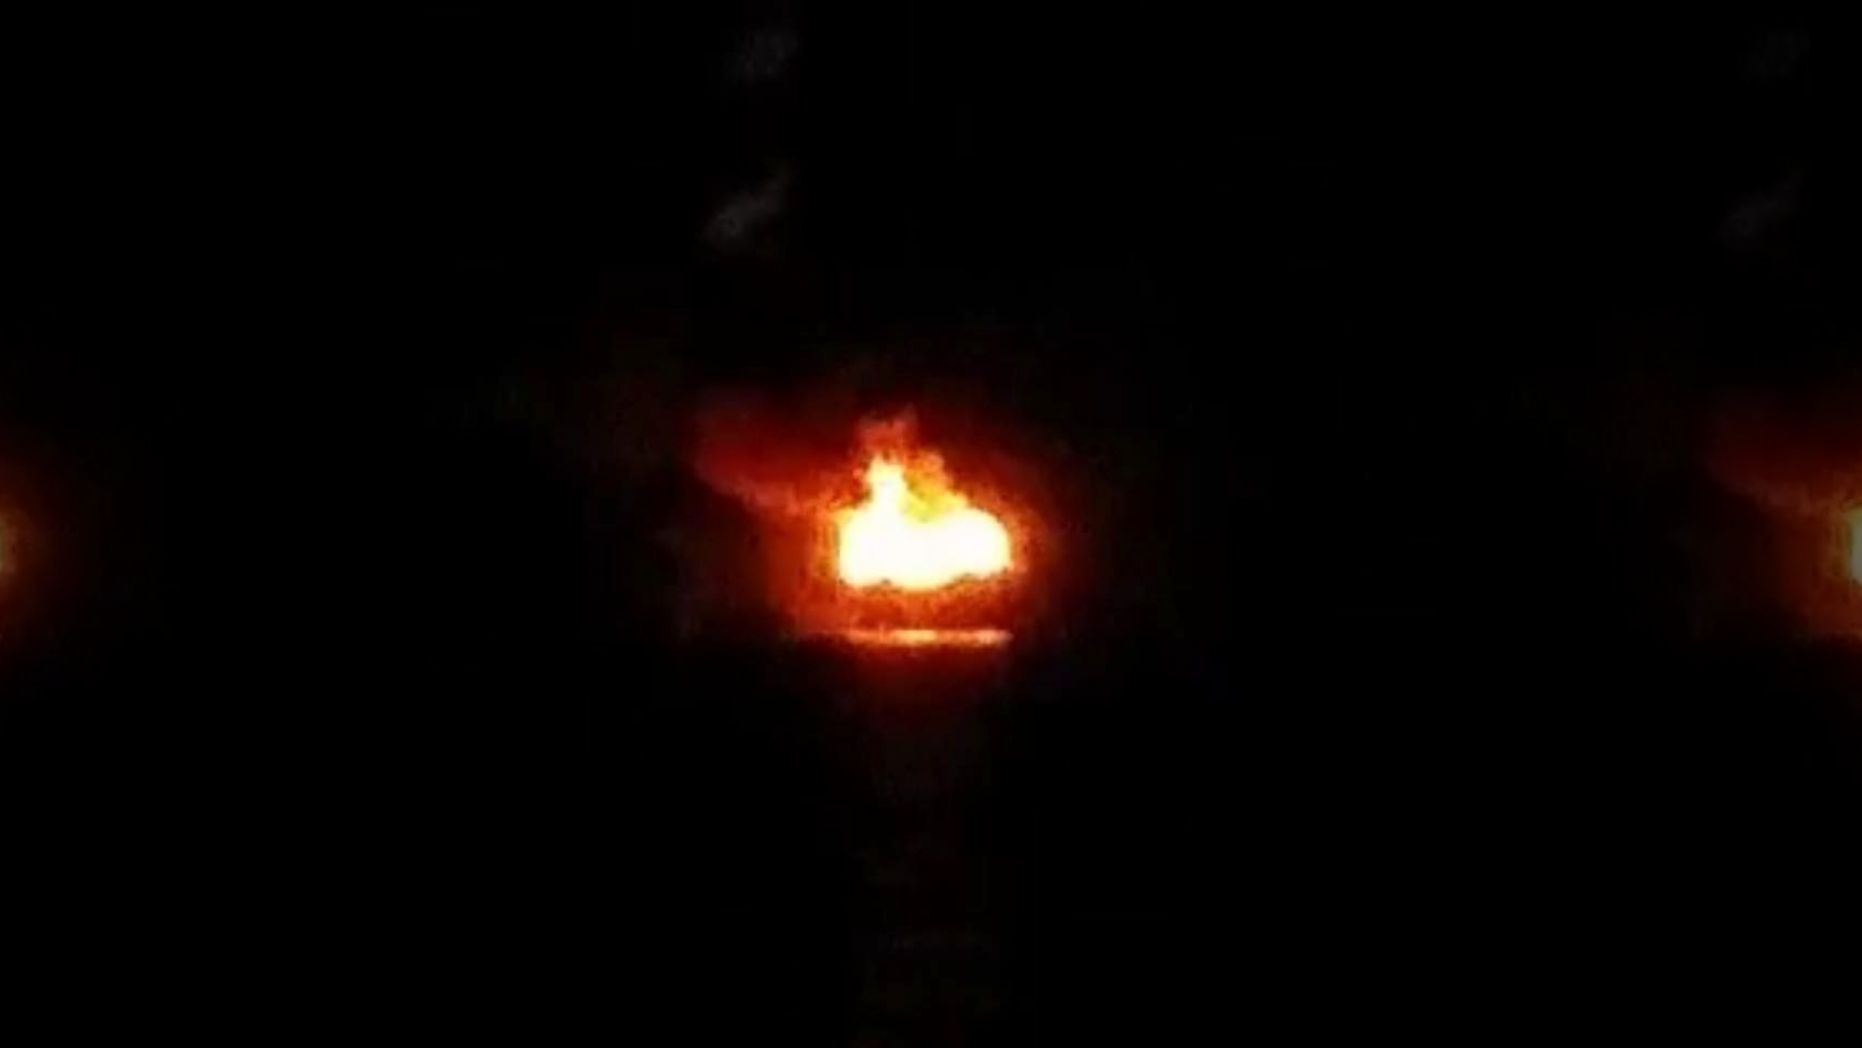 CBS: (Breaking) Oil rig explodes in Louisiana lake, severe injuries, one missing